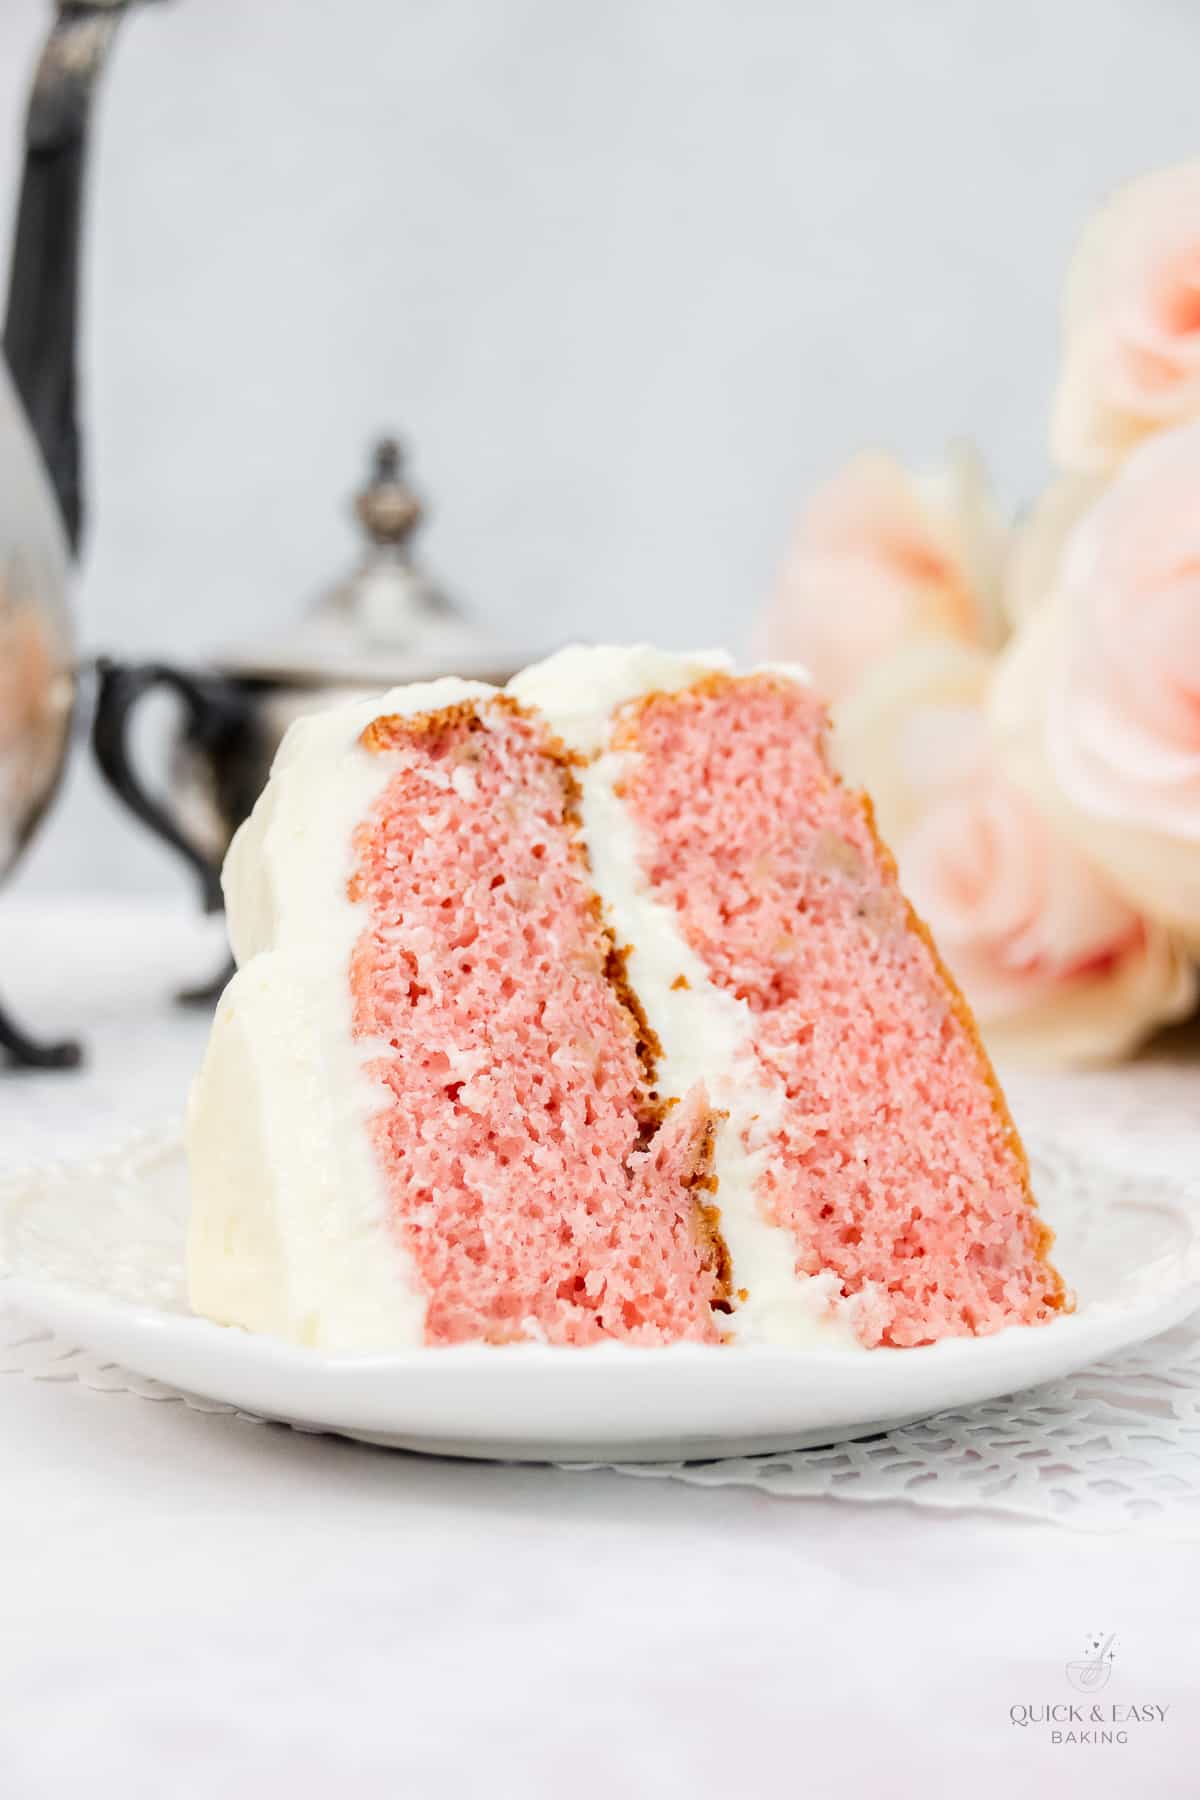 Large slice of strawberry banana cake on a white plate.